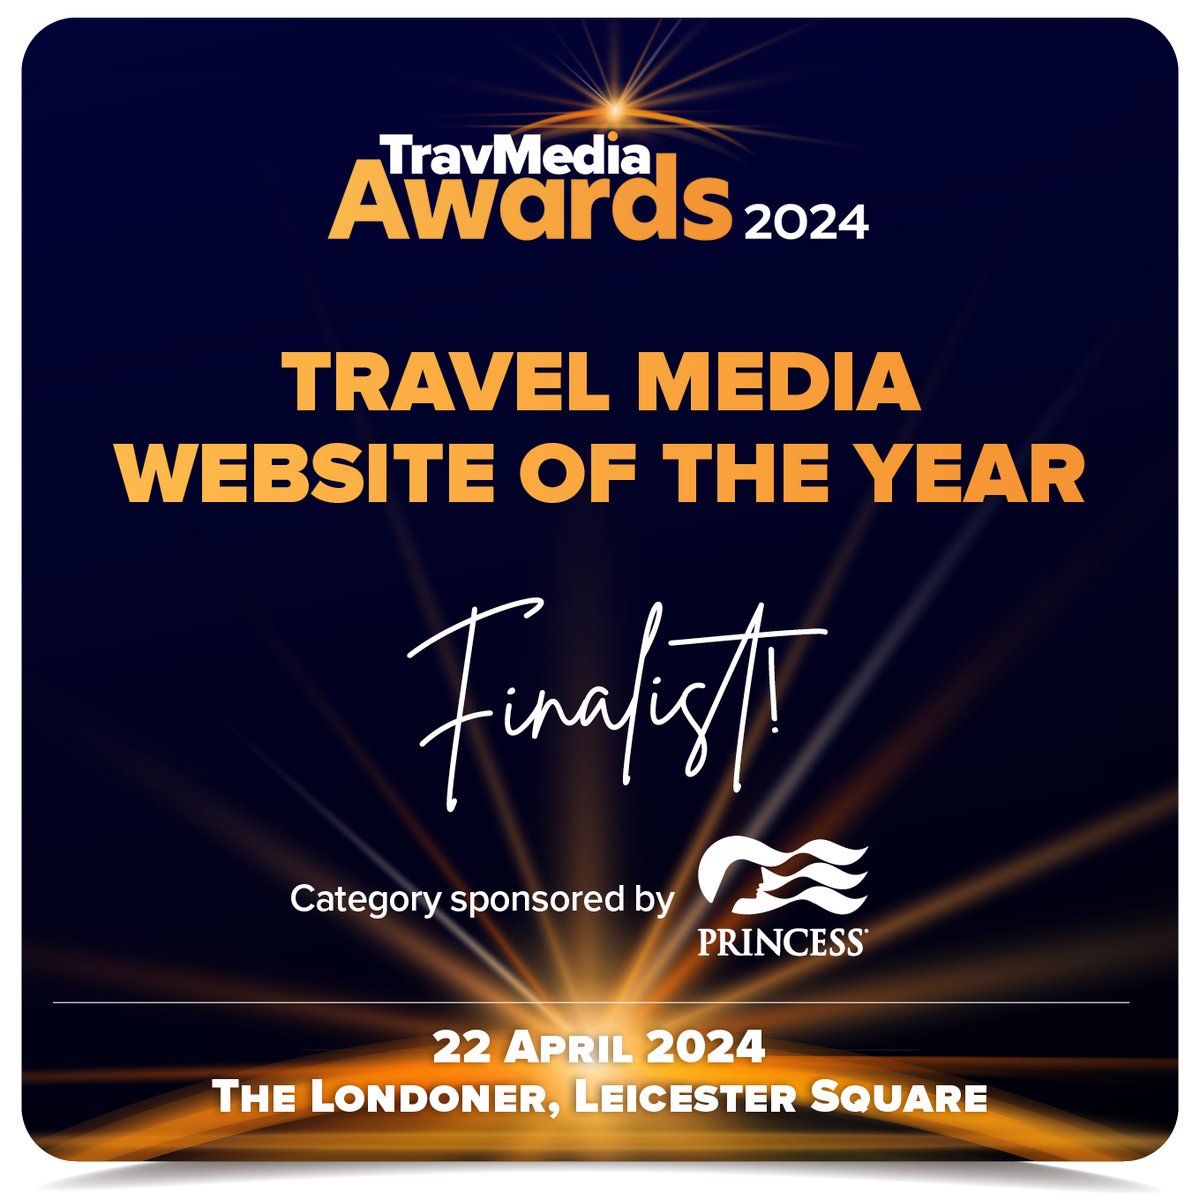 Looking forward to getting spruced up for the @TravMedia_UK awards tonight where we're up for Website of the Year. 

#TravMediaAwards